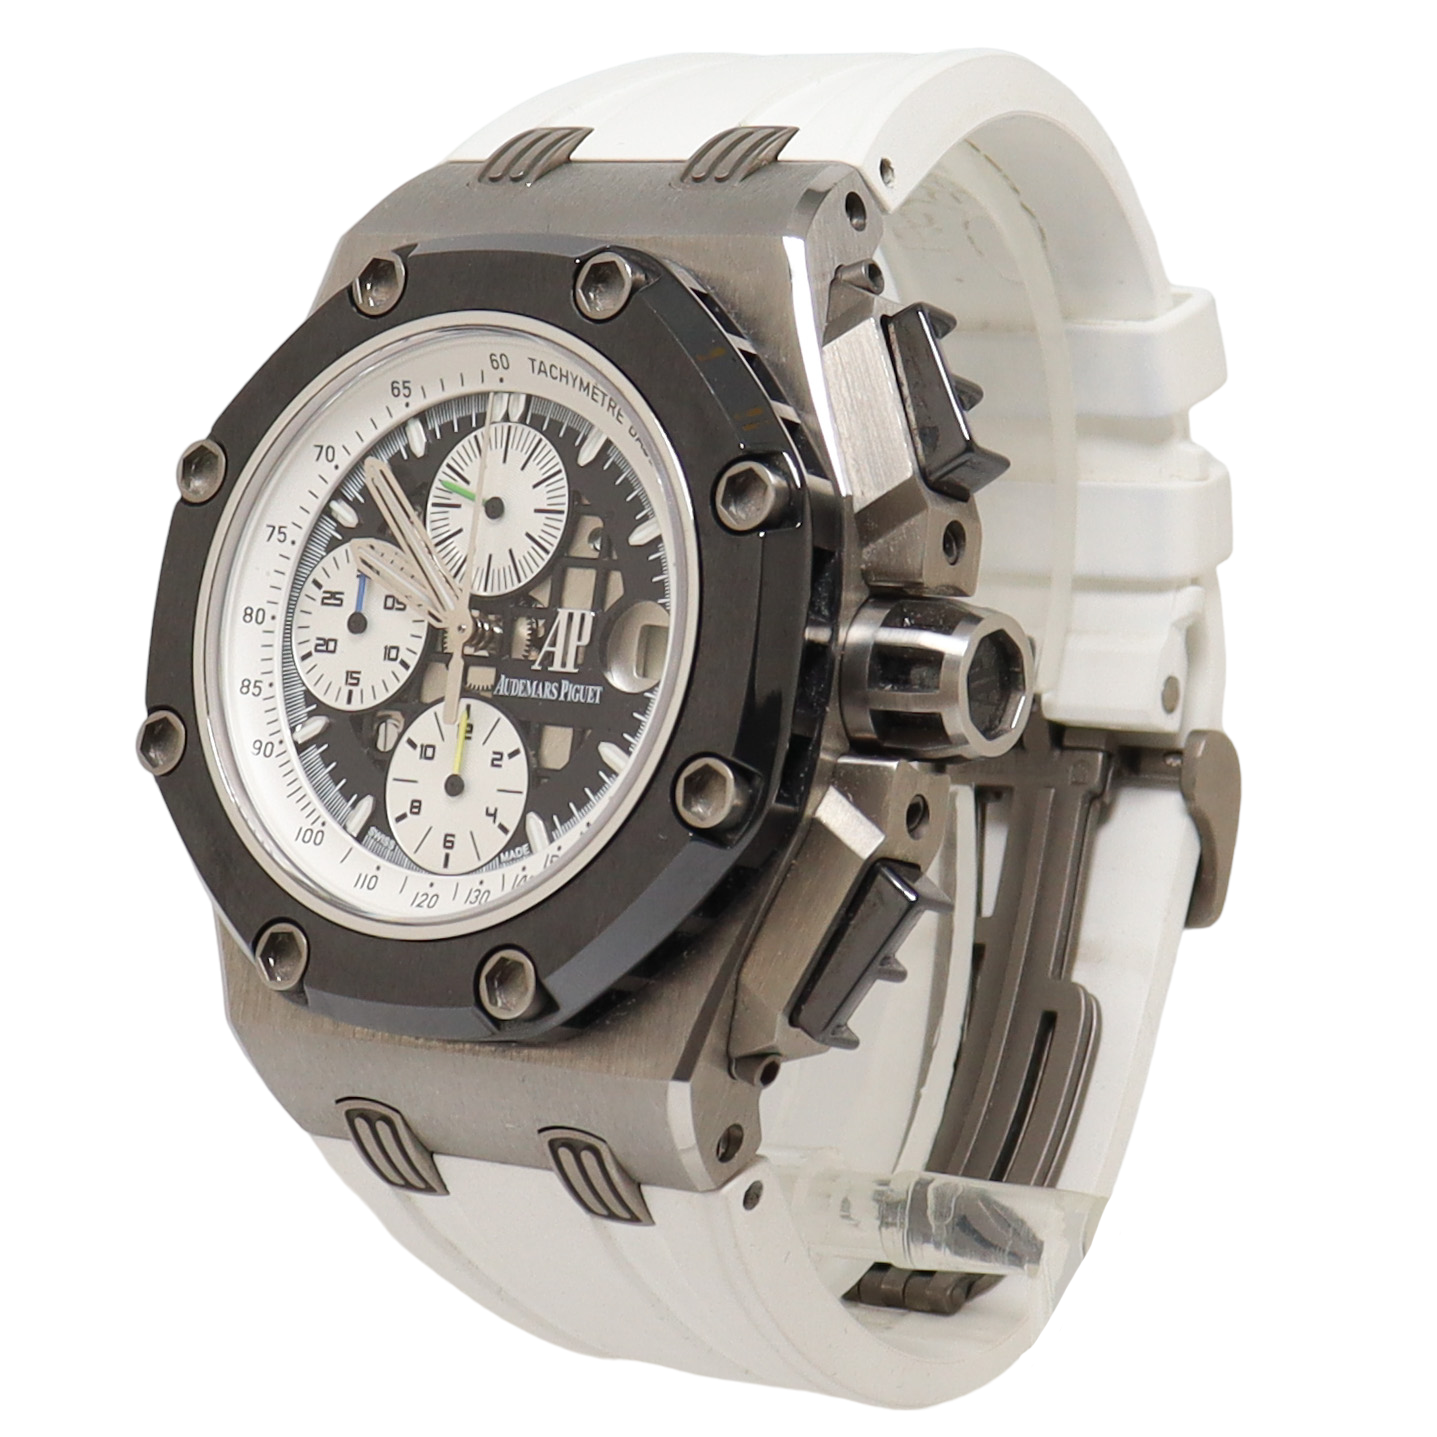 Audemars Piguet Royal Oak Stainless Steel 44mm White & Black Chronograph Dial Watch Reference#: 26078IO.OO.D001VS.01 - Happy Jewelers Fine Jewelry Lifetime Warranty